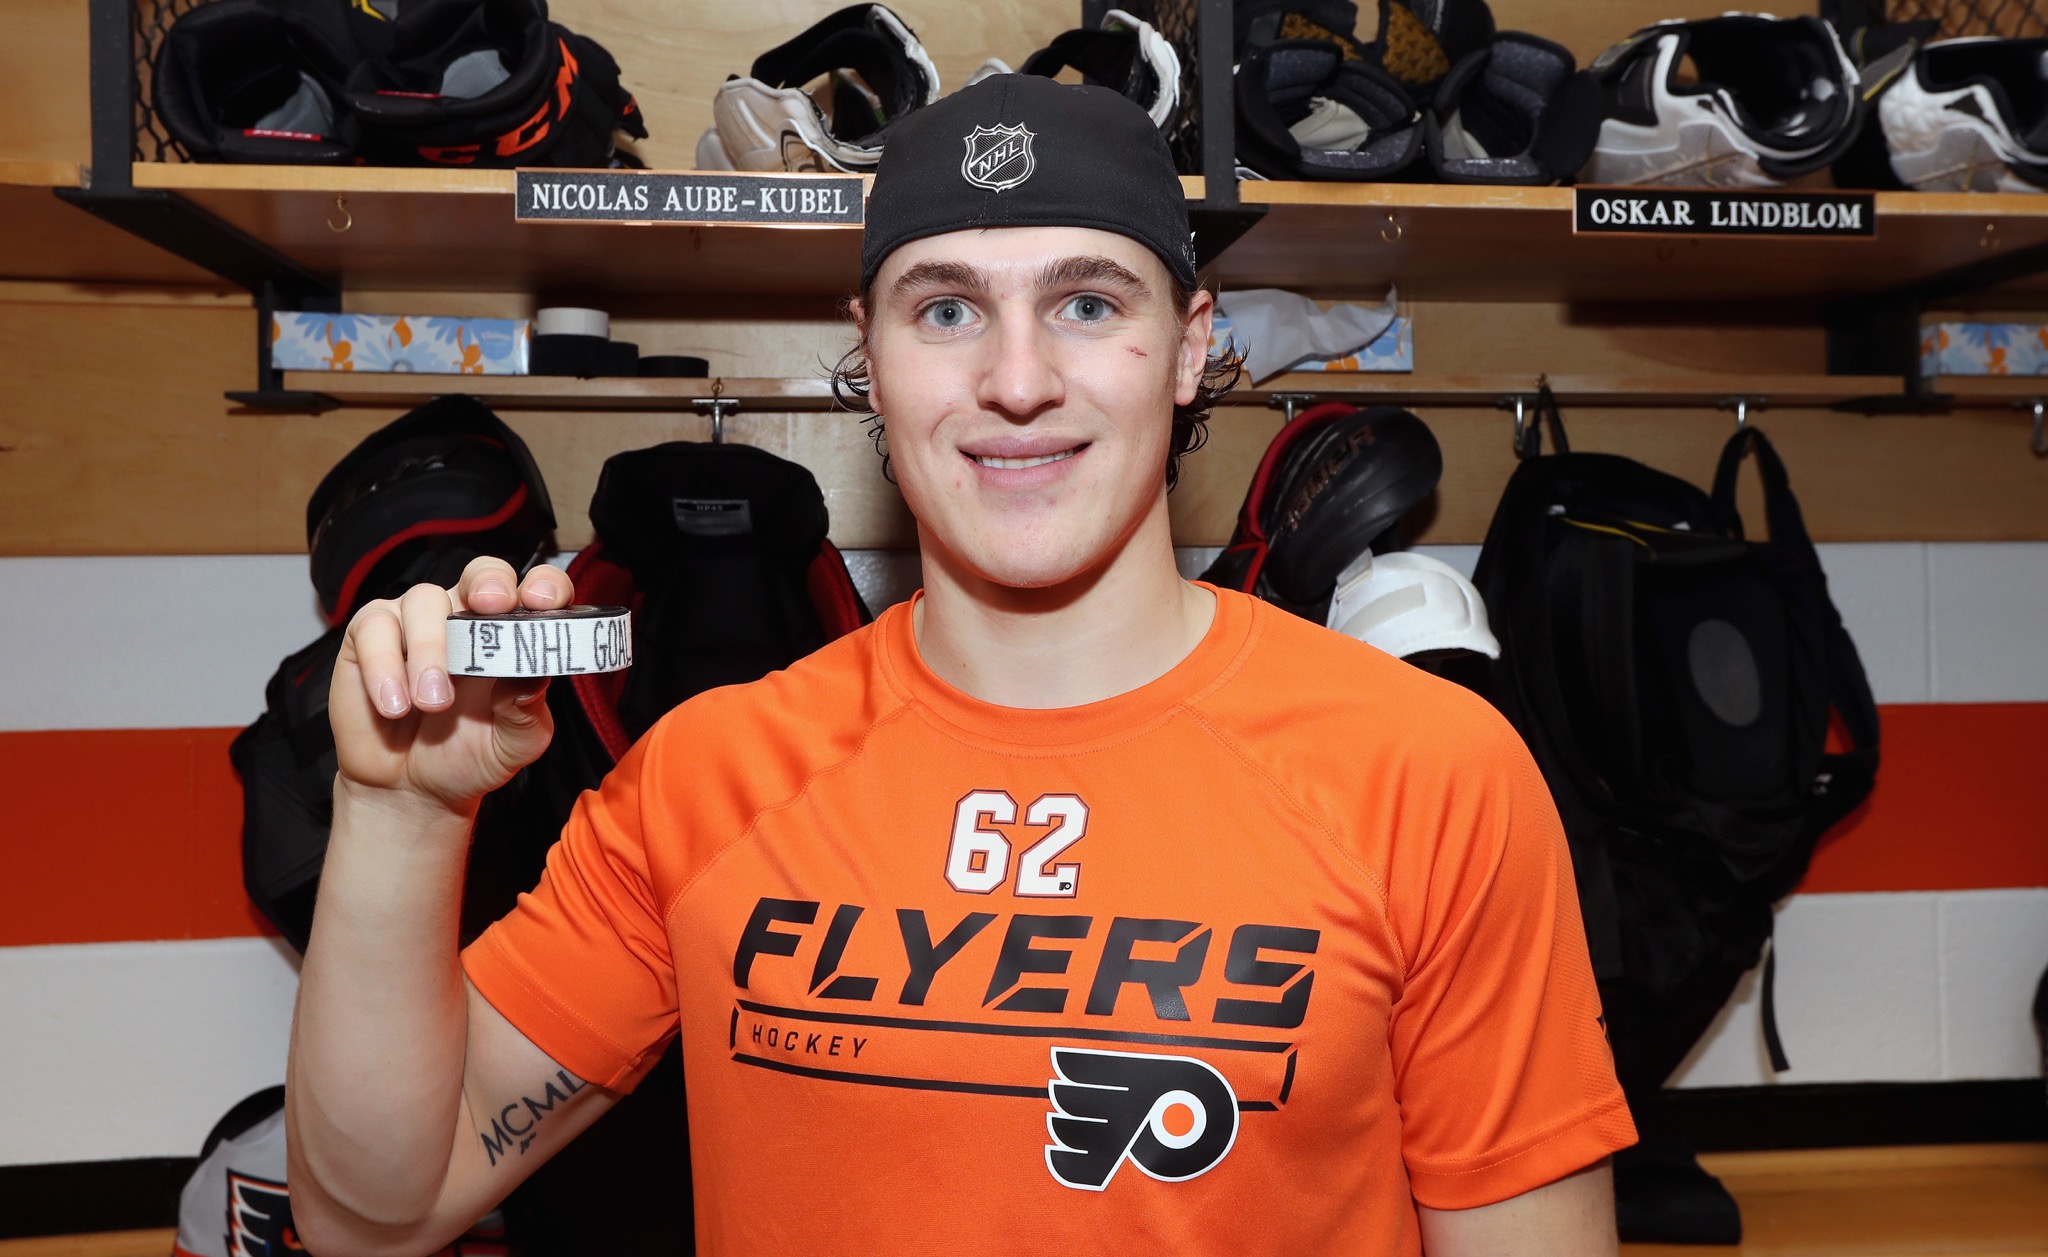 Flyers Sign Nicolas Aube-Kubel to a Two-Year Contract Extension